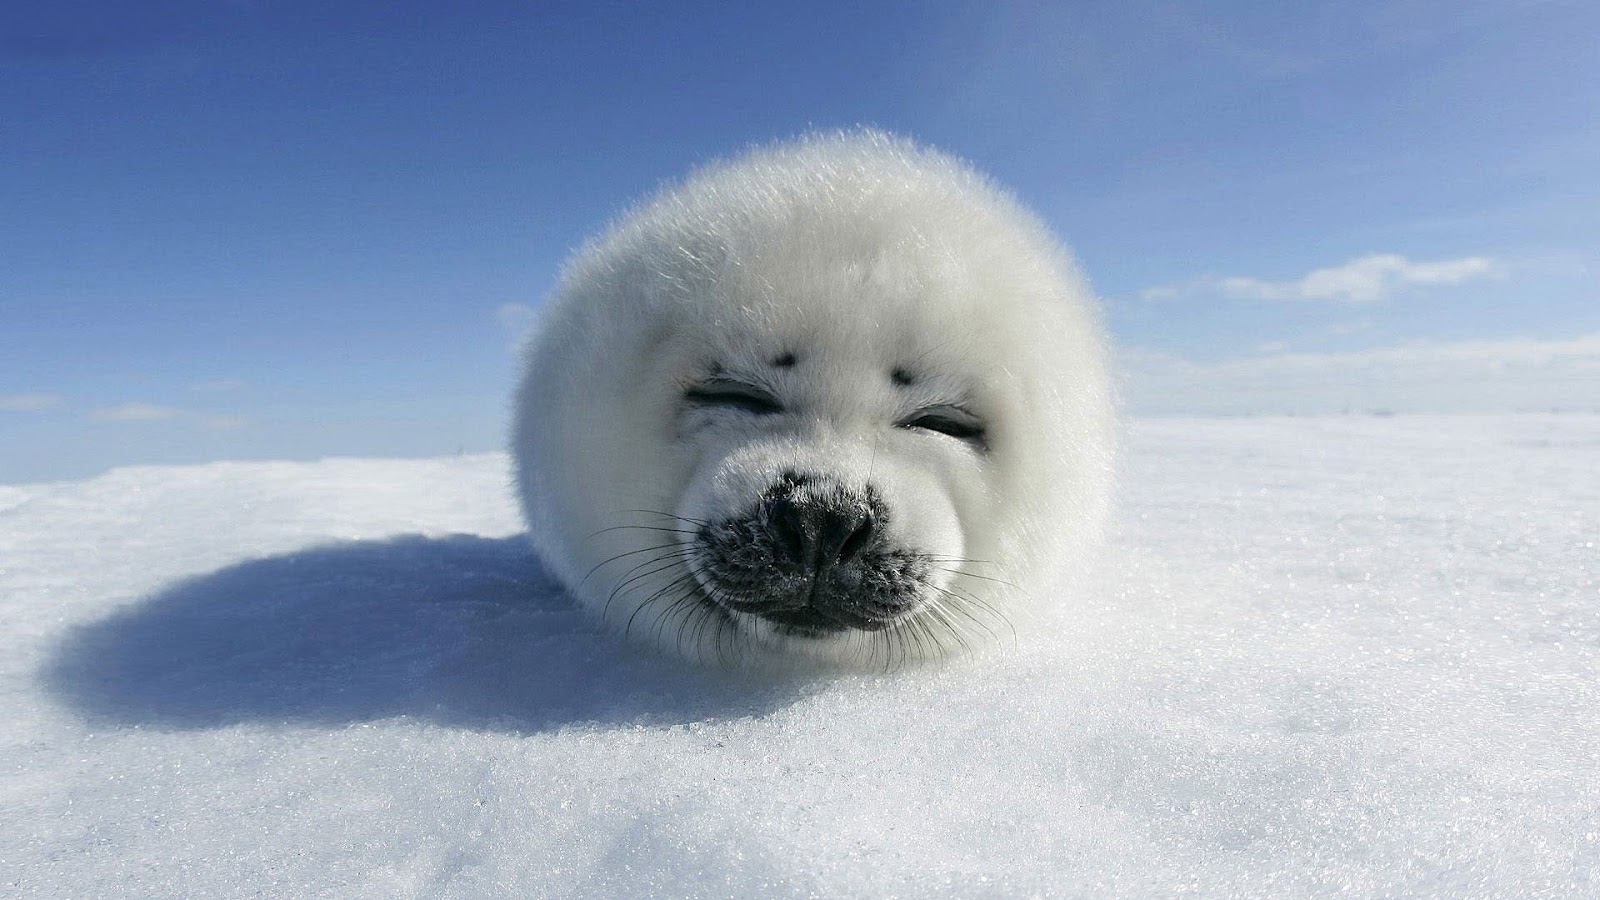 http://1.bp.blogspot.com/-9P-9RDH2QmA/UDe9ClmO0uI/AAAAAAAABBM/2uwTzjNsC6I/s1600/hd-baby-seal-wallpaper-with-a-baby-seal-resting-on-the-snow-hd-seals-wallpapers-backgrounds-pictures-photos.jpg